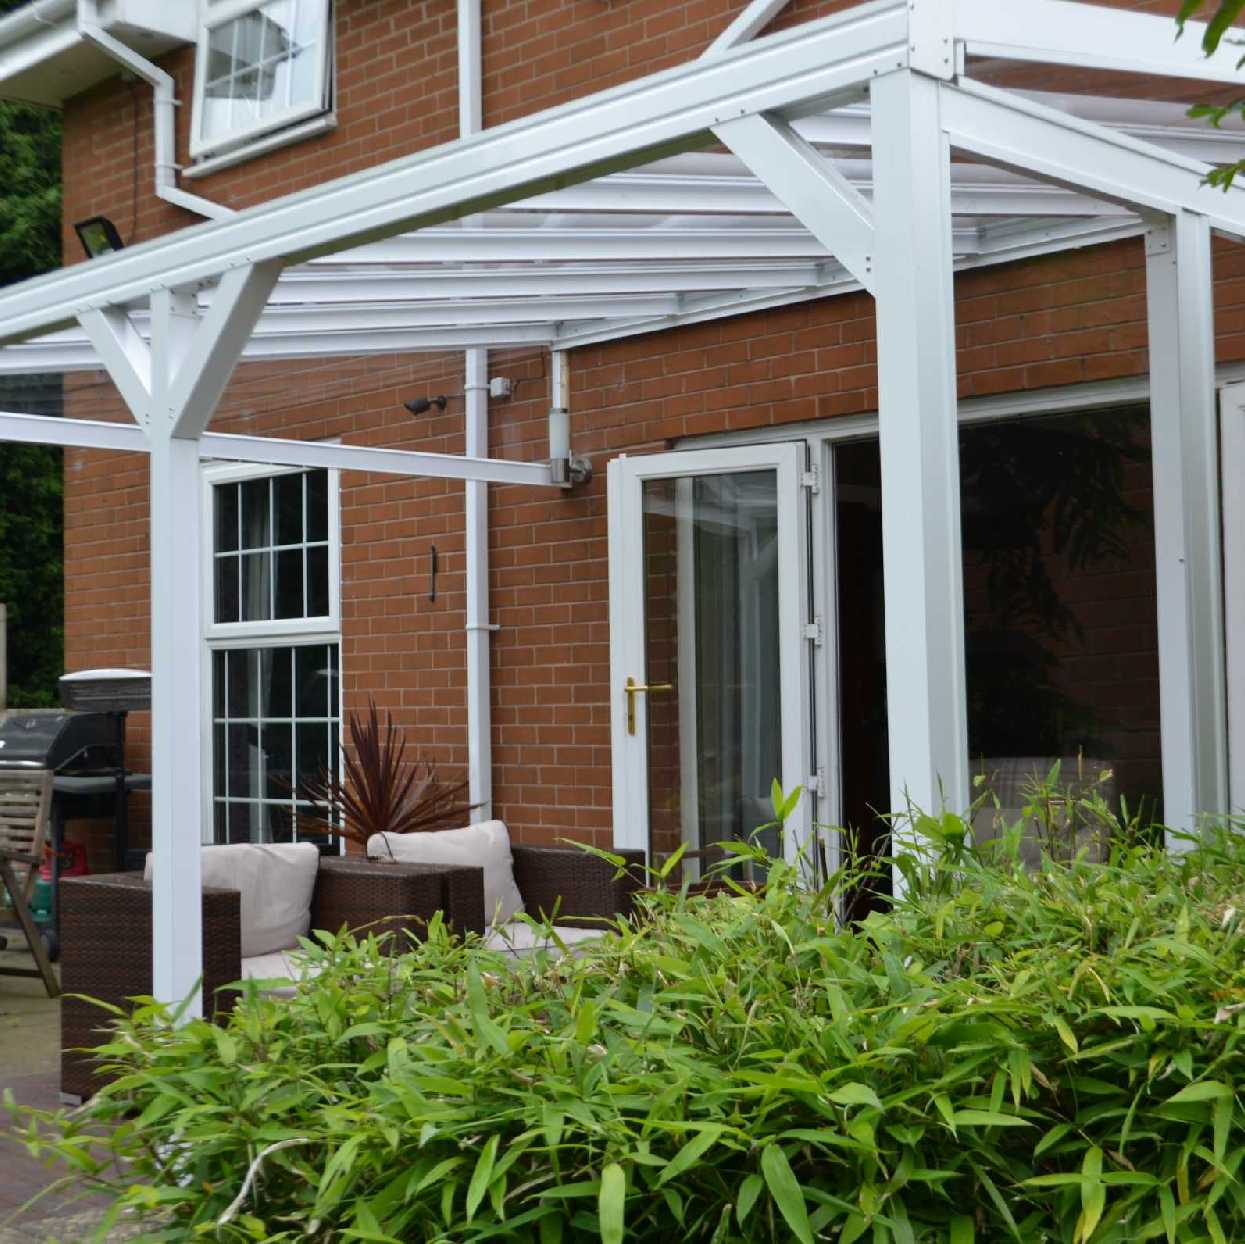 Omega Smart Lean-To Canopy, White UNGLAZED for 6mm Glazing - 9.1m (W) x 1.5m (P), (5) Supporting Posts from Omega Build